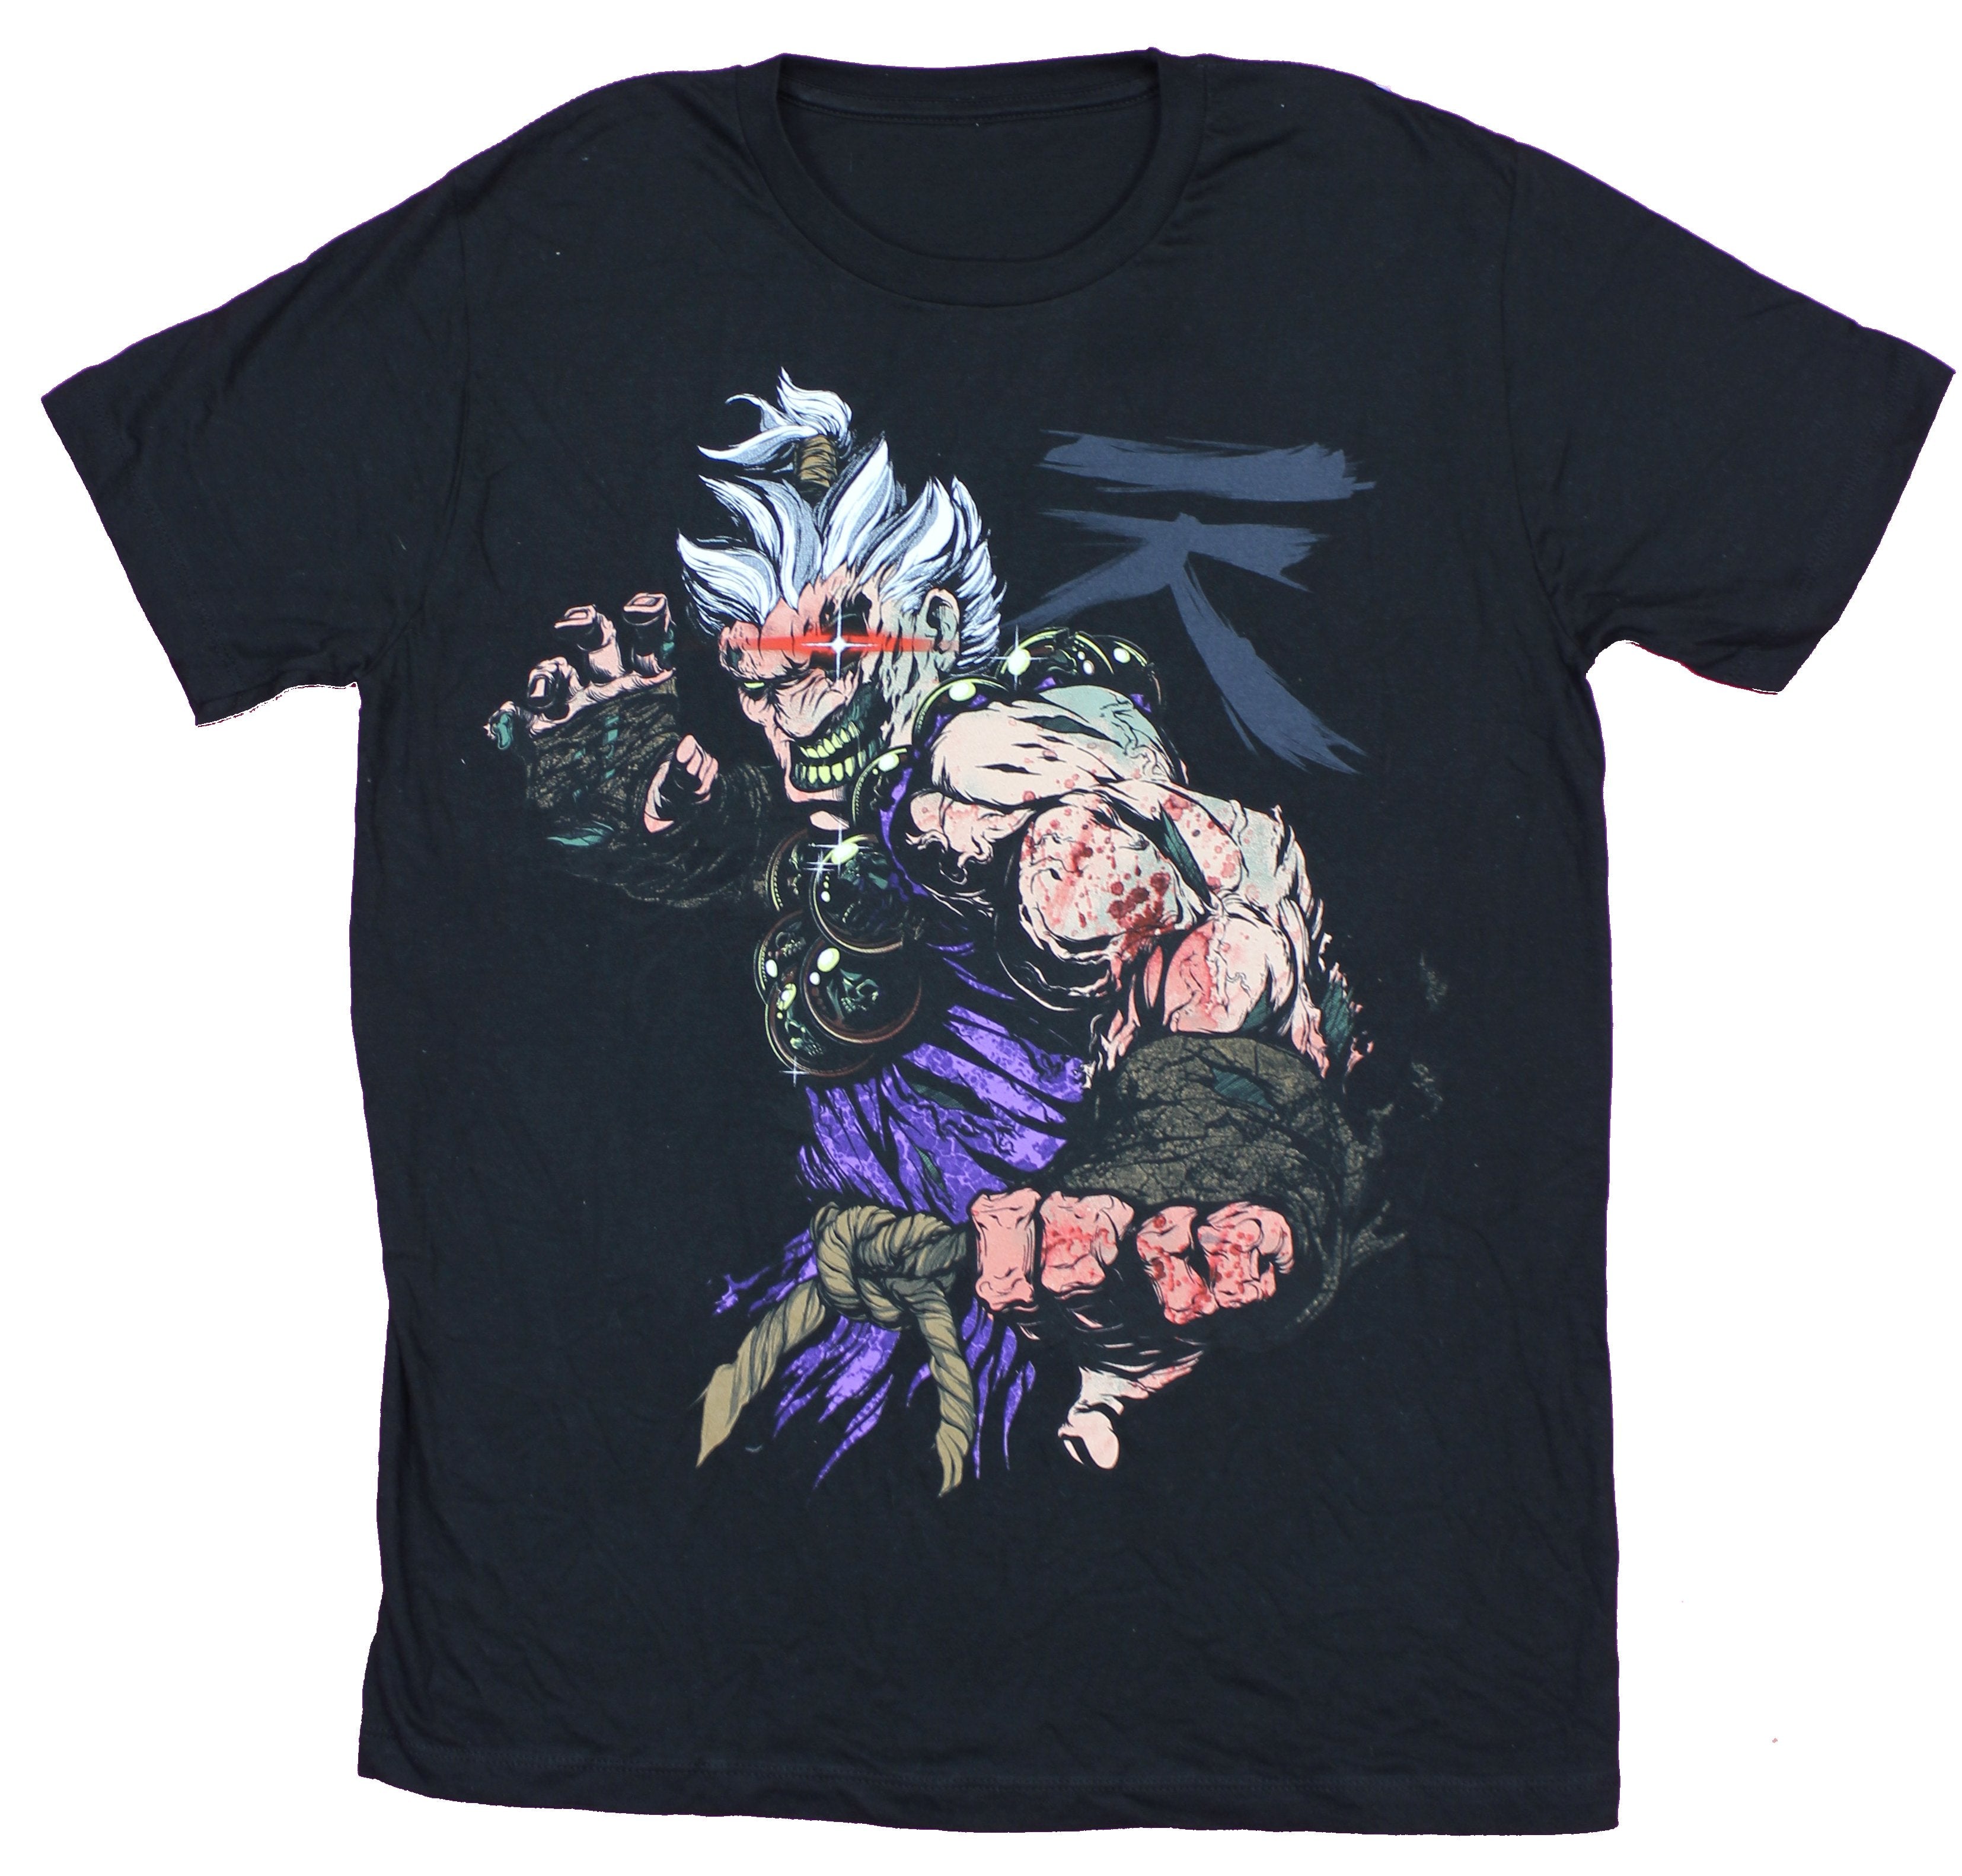 Street Fighter Mens T-Shirt - White Haired Akuma Ready to Attack Image